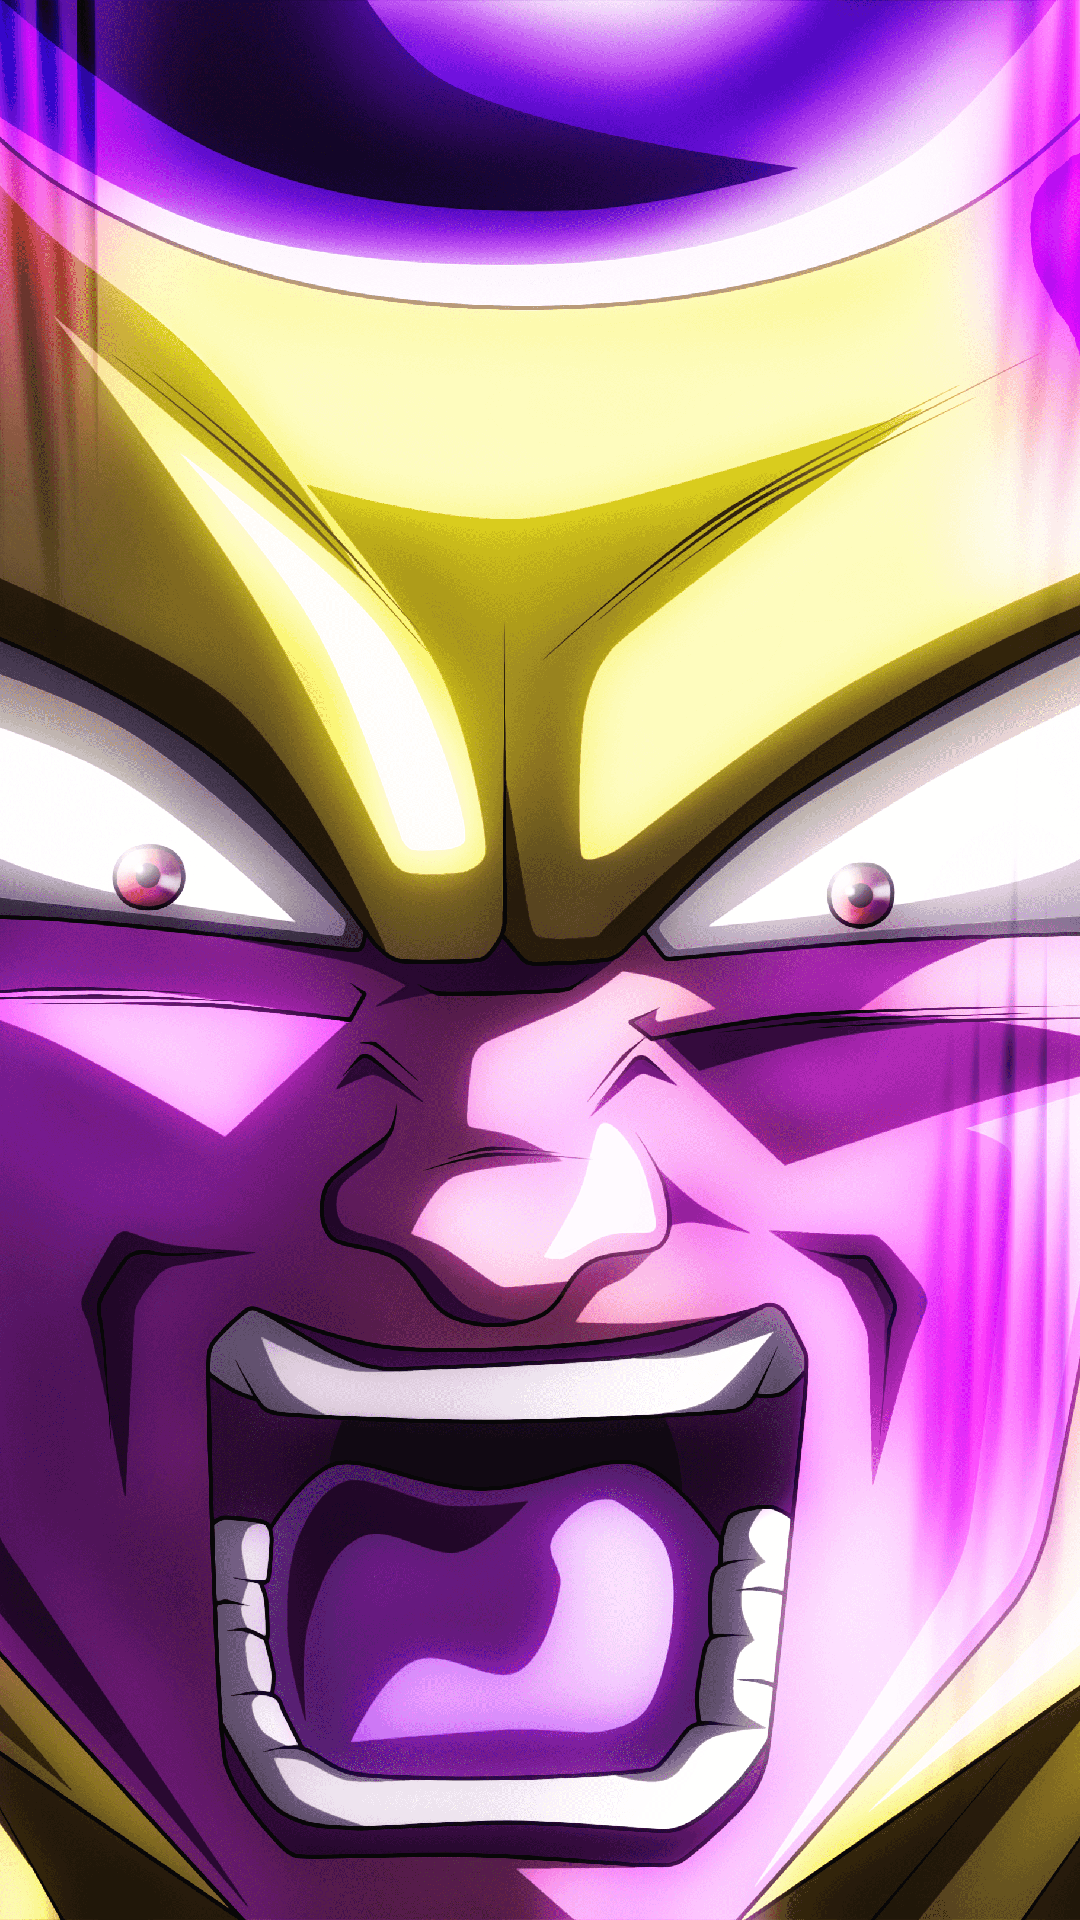 Hydros on X SPARKING Legends Limited Goku amp Frieza Final Form 4K  Art 4K PC Wallpaper 4K Phone Wallpaper amp HD Profile Picture from  Dragon Ball Legends DBLegends DBL5thAnniversary httpstcoG5FnYLzts6   X